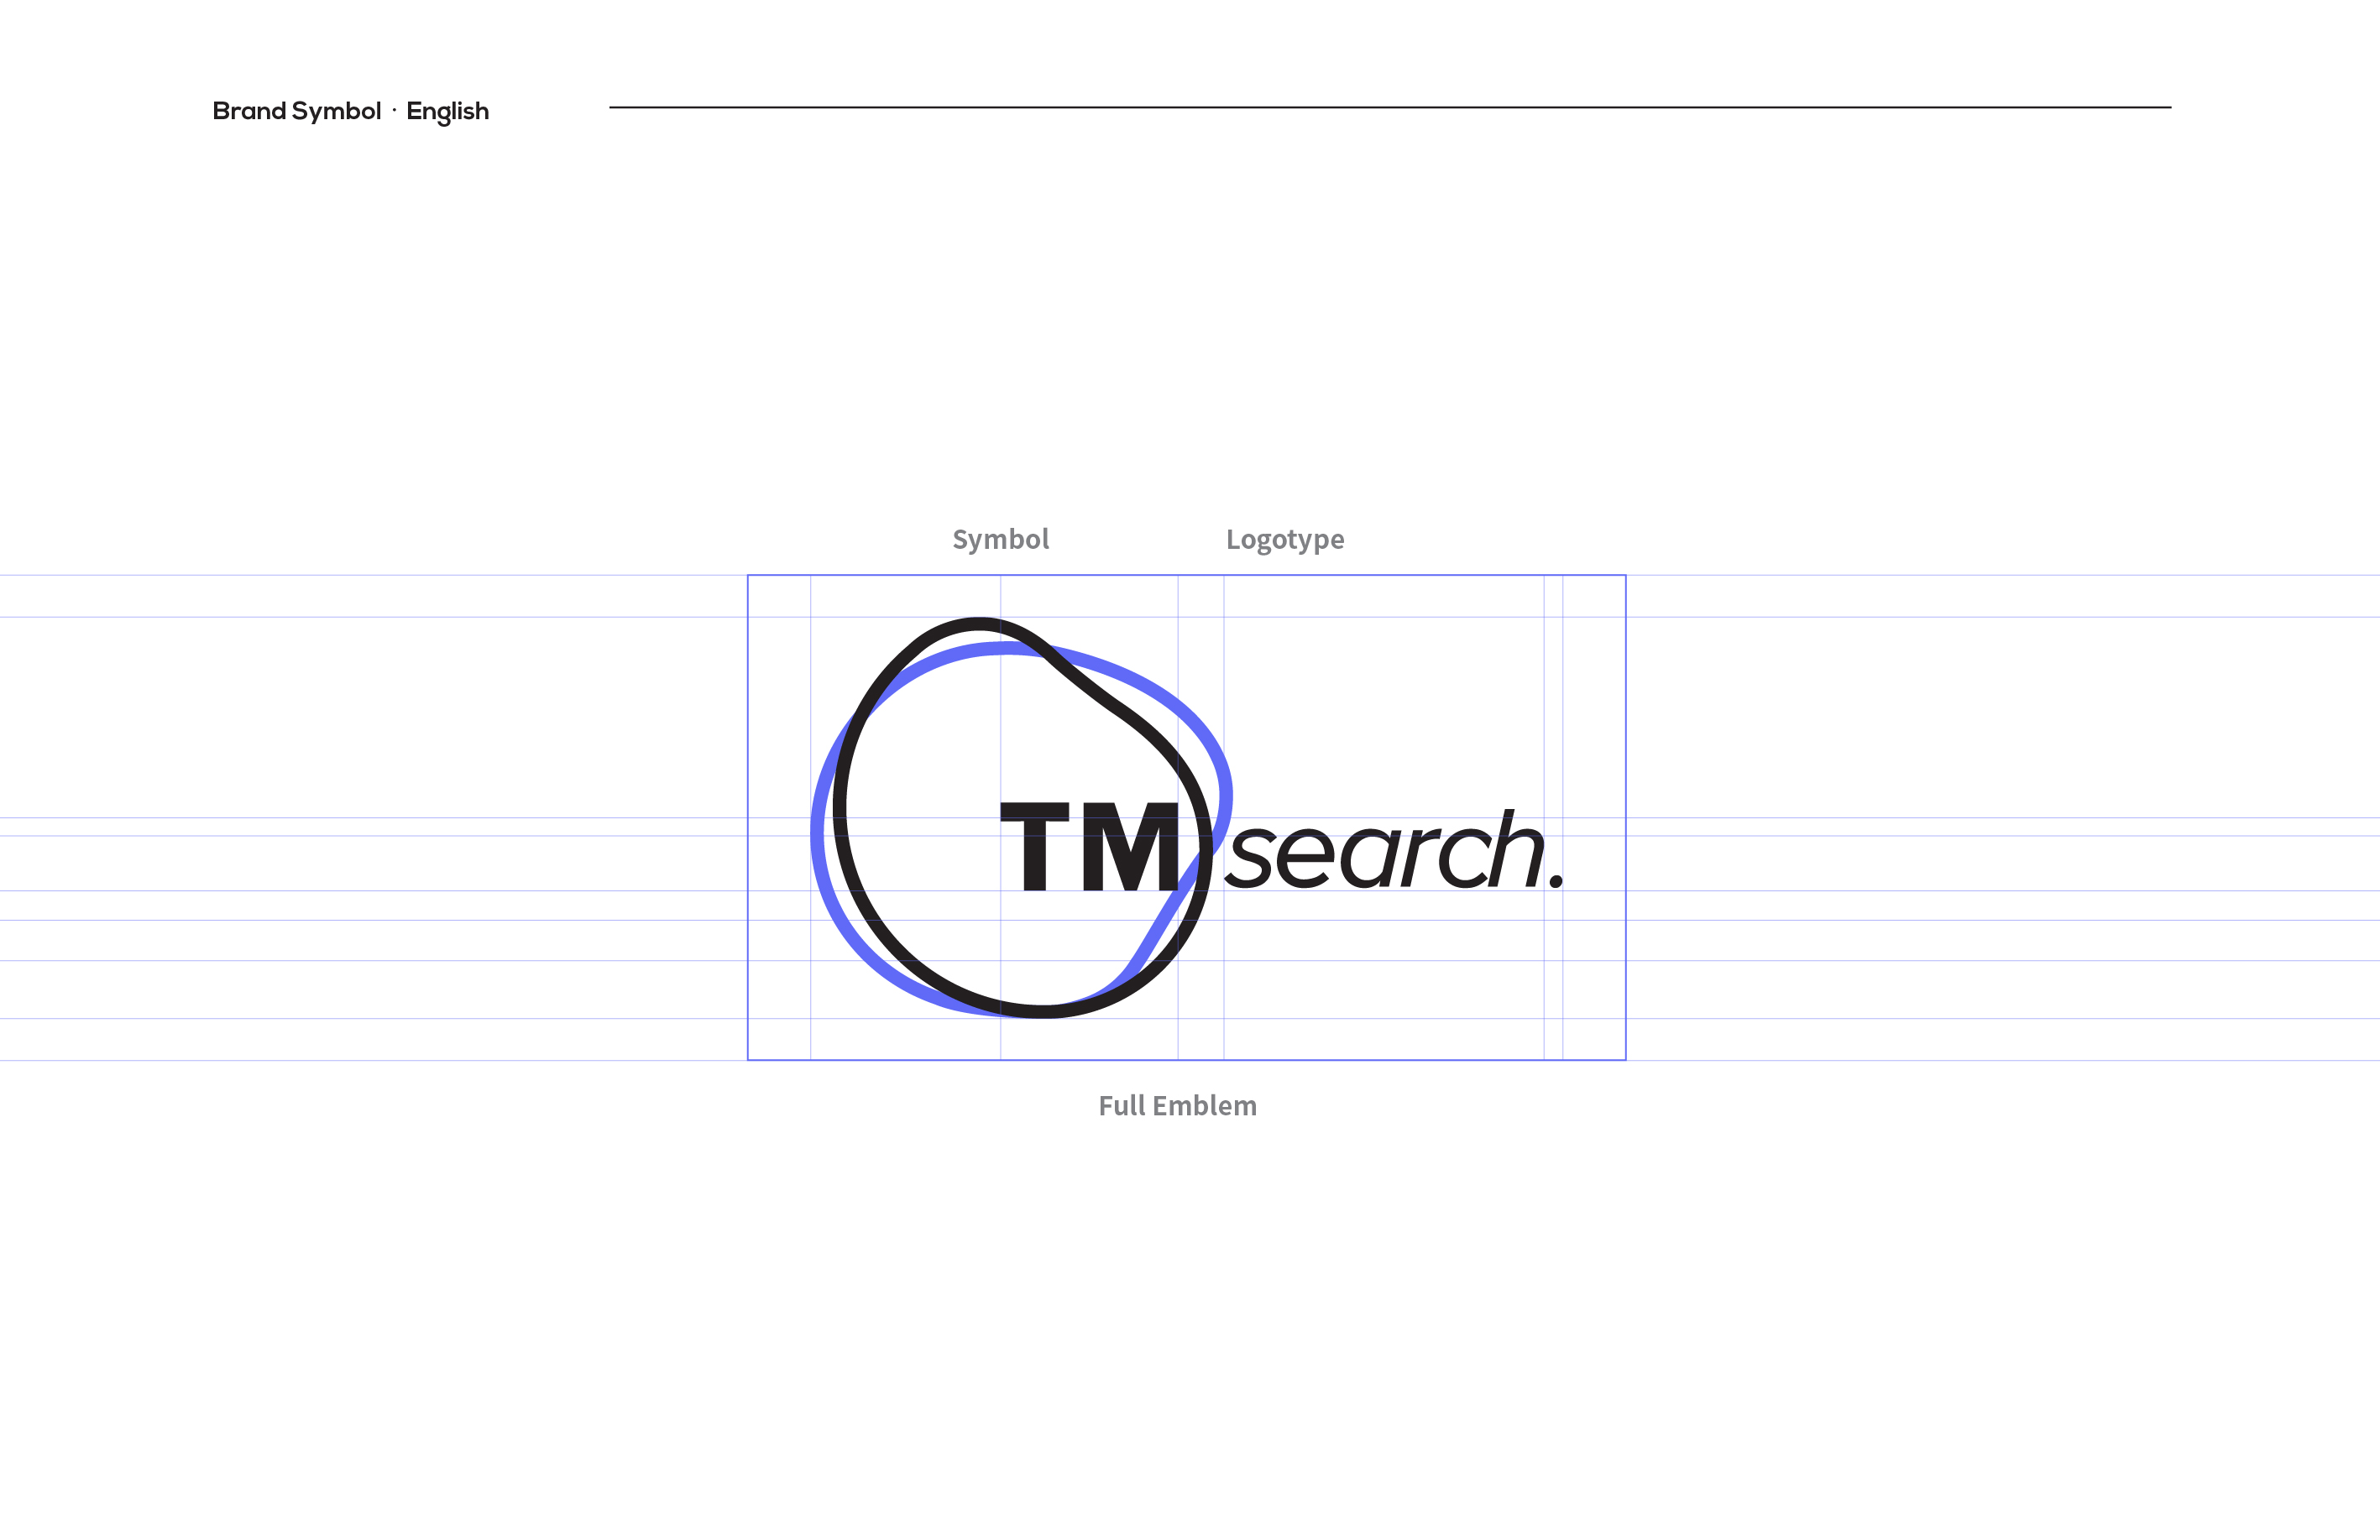 Tmsearch